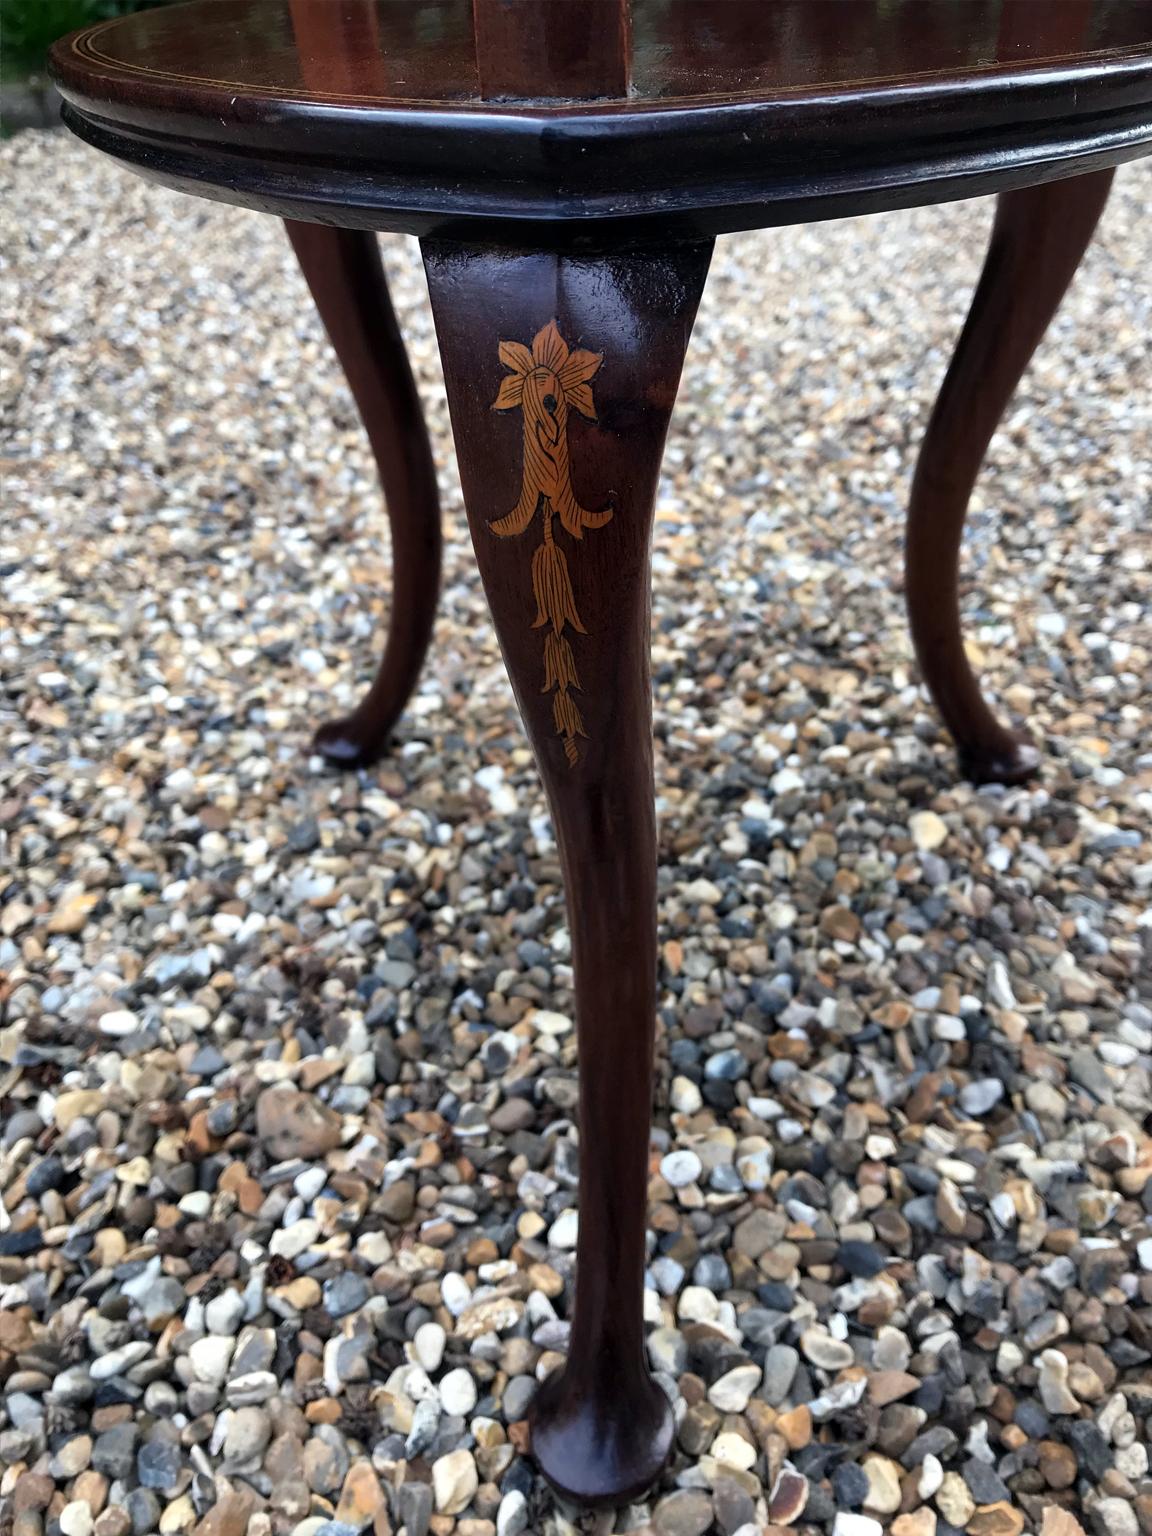 19th Century Mahogany Inlaid Heart Shaped Occasional Table with Two Tiers In Good Condition In Richmond, London, Surrey